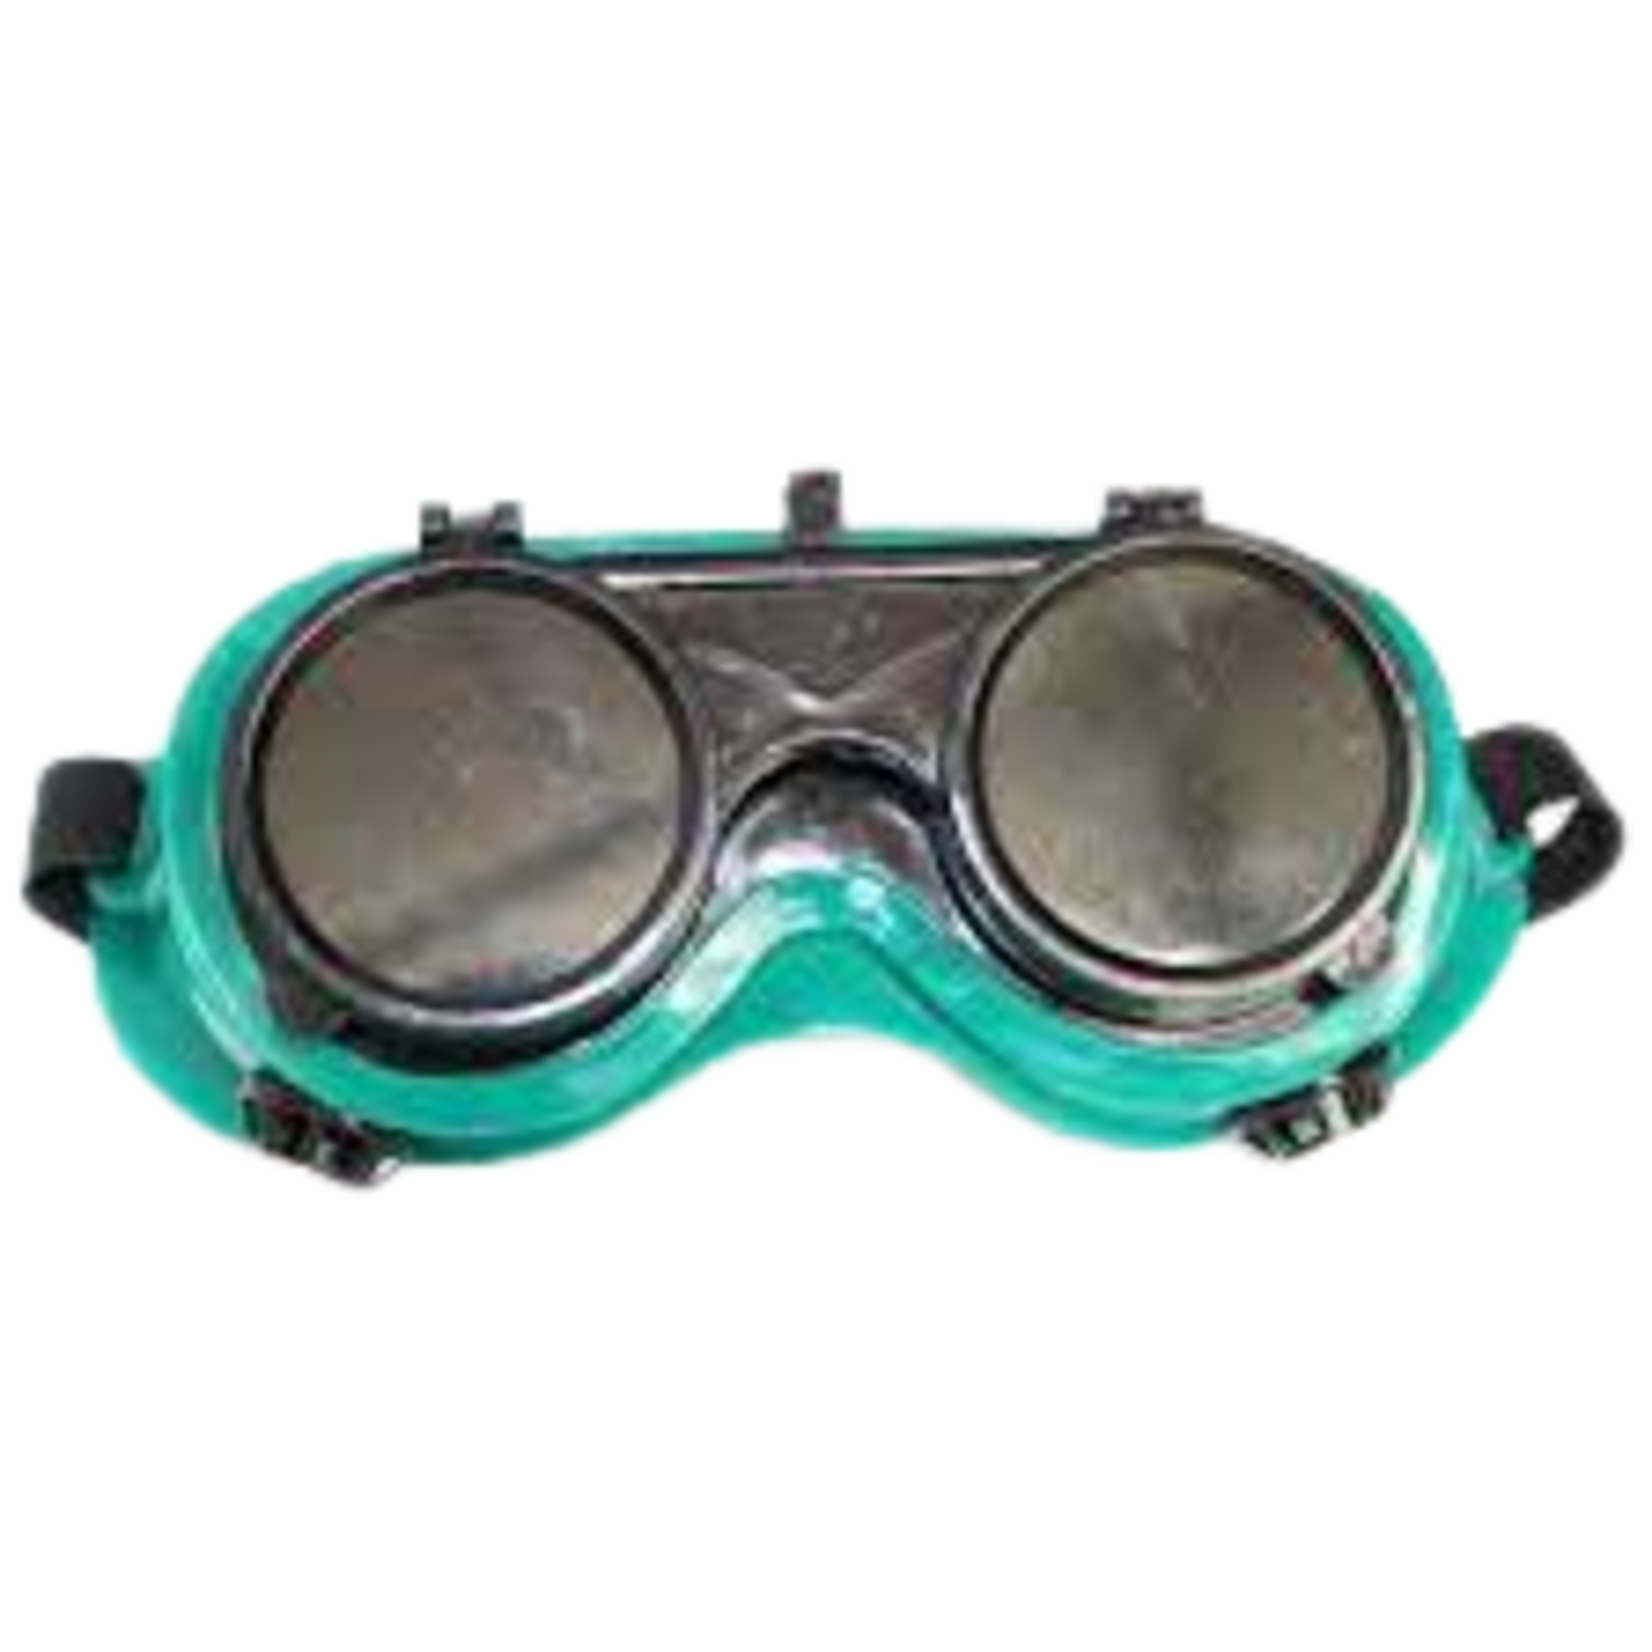 WELDING GOGGLES WITH UNVEIL GLASS